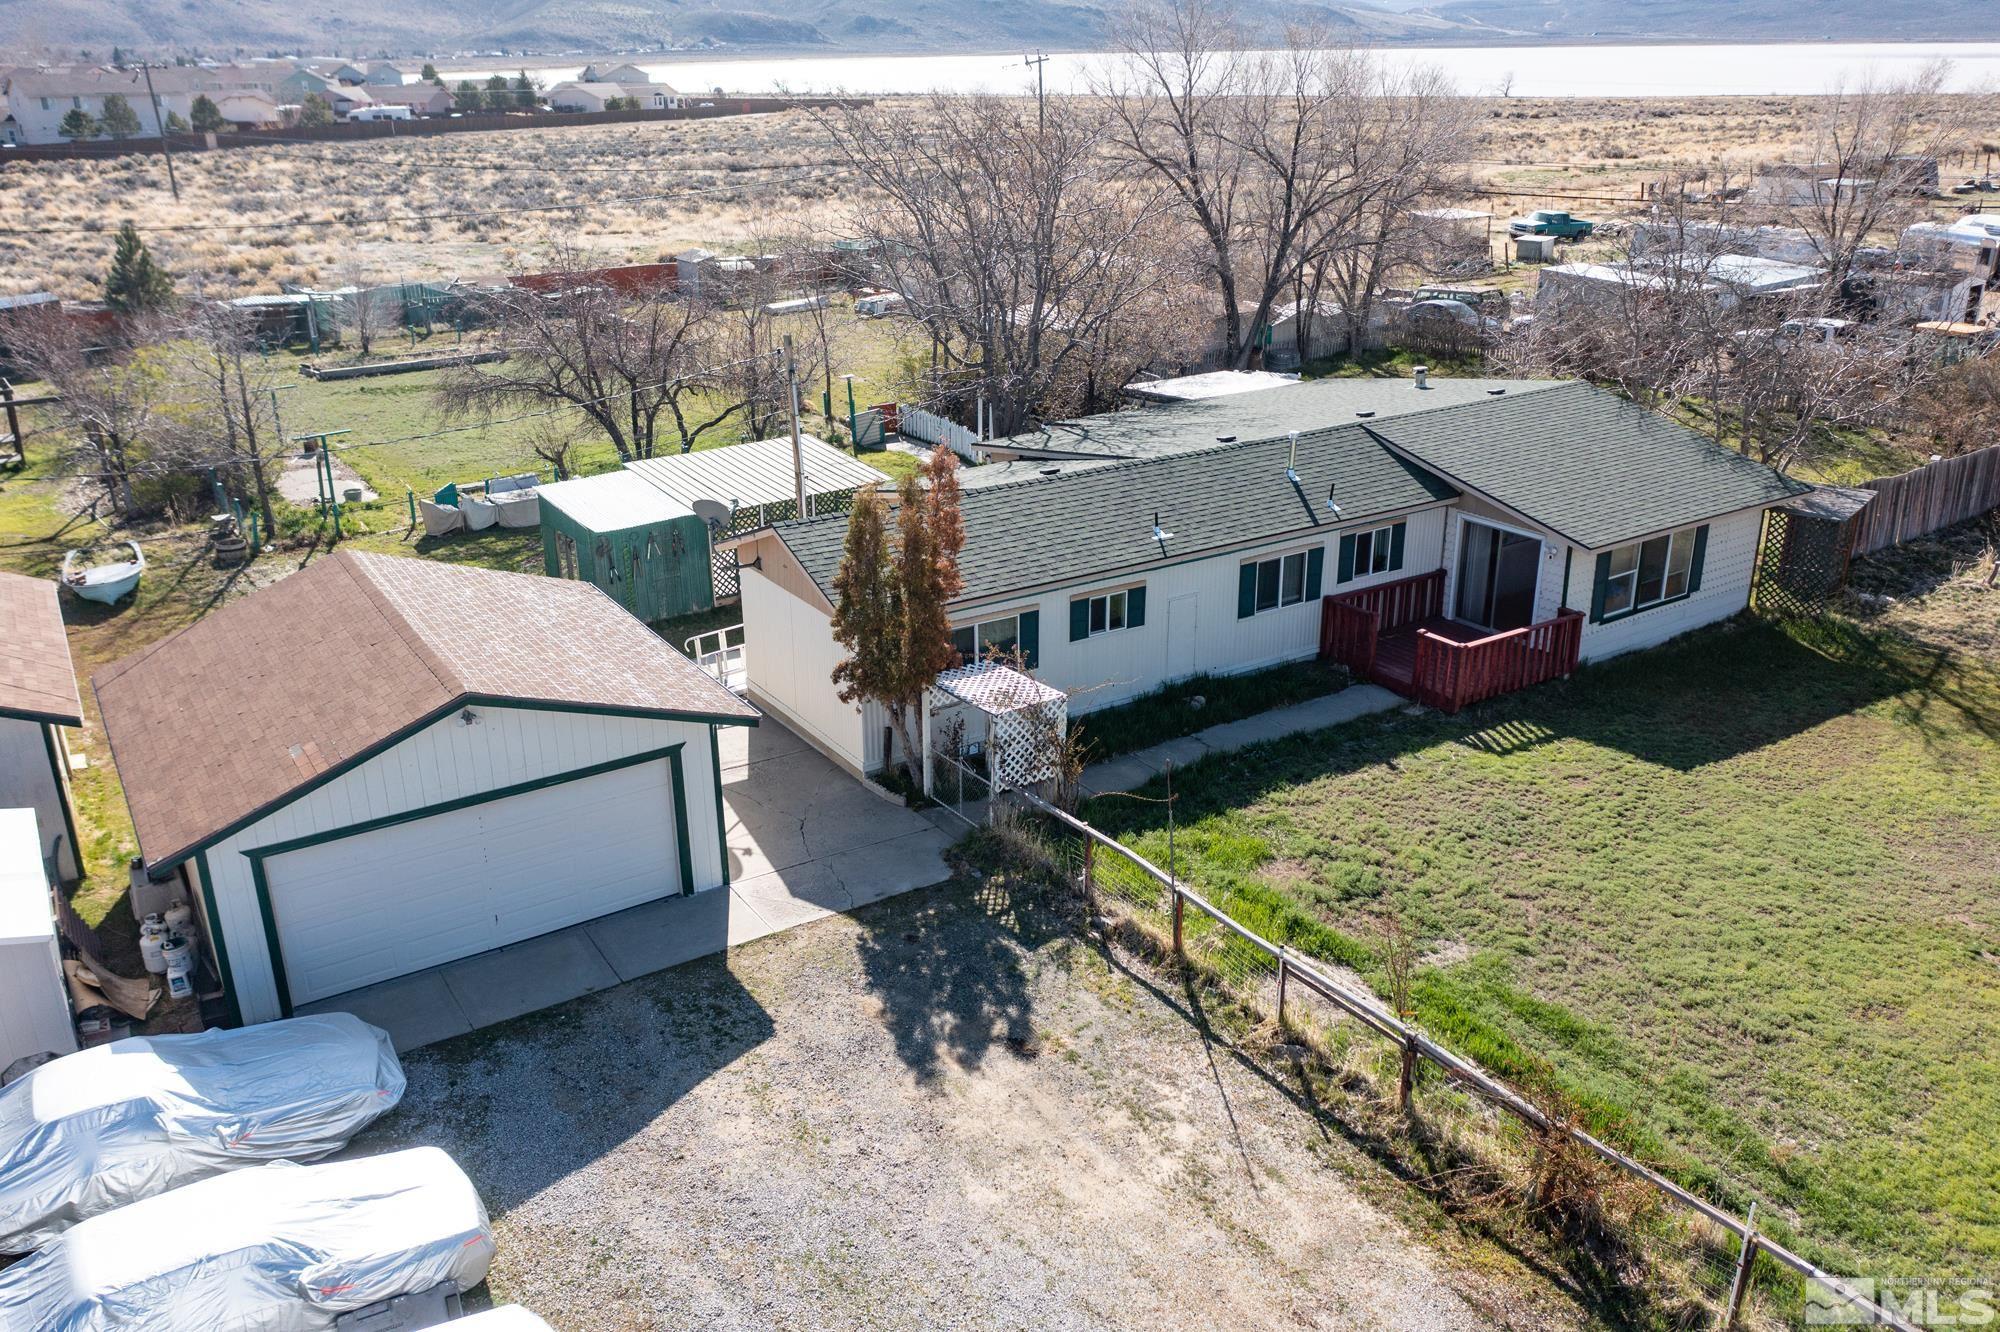 a aerial view of a house with yard porch and sitting area